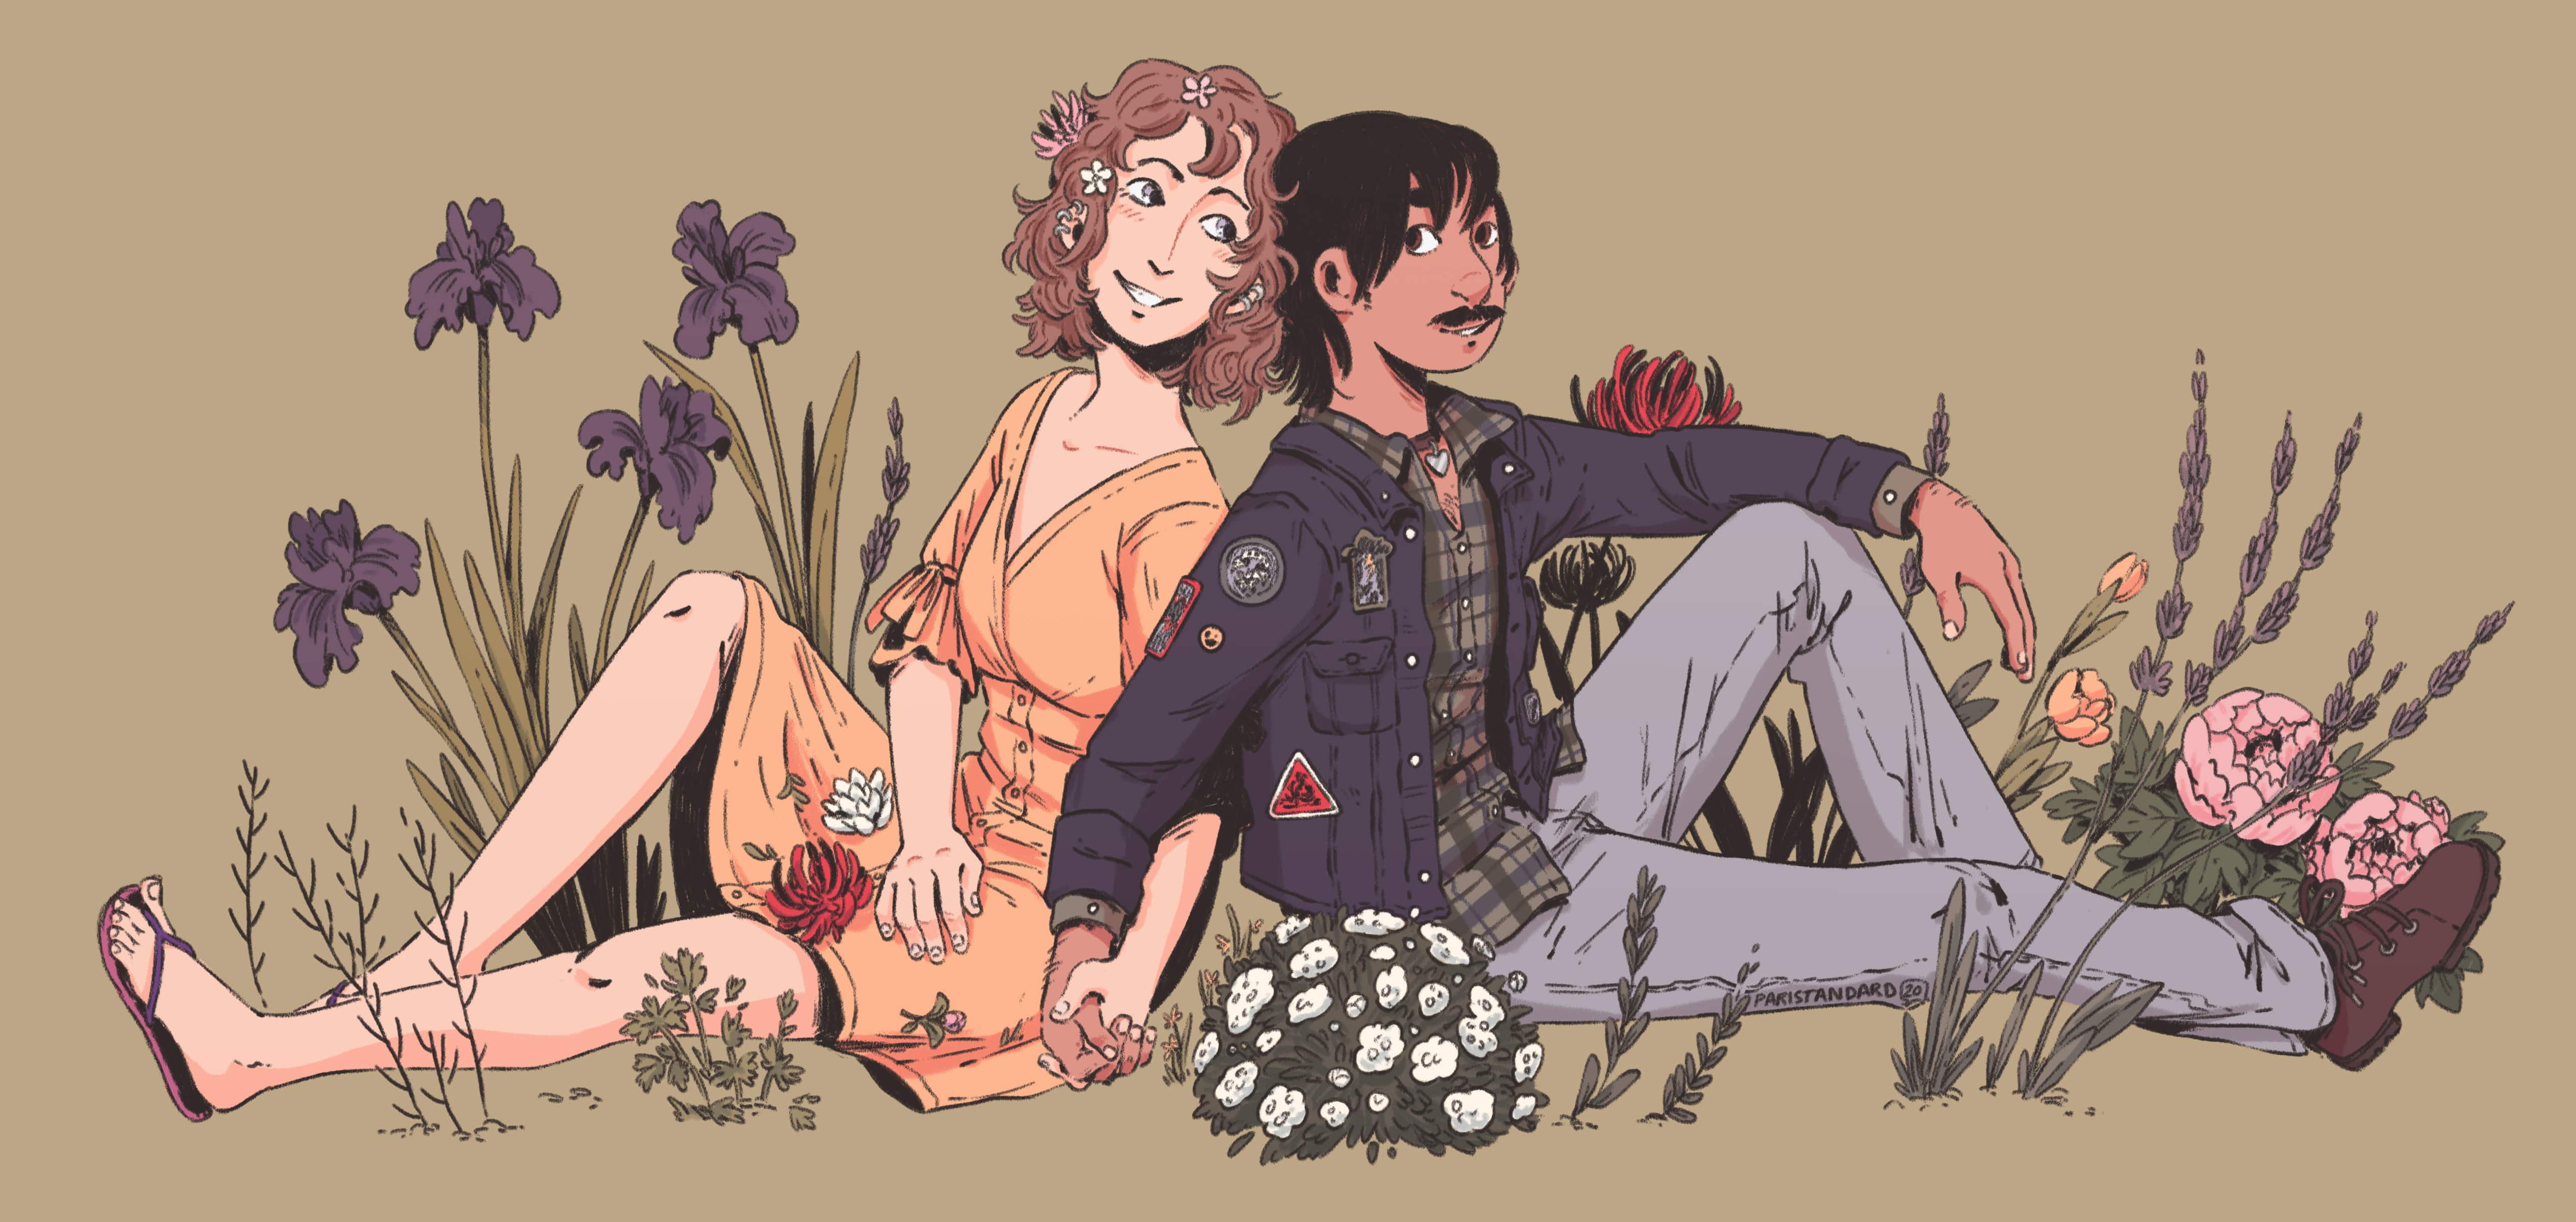 georgie and mac leaning back to back, holding hand, surrounded by flowers